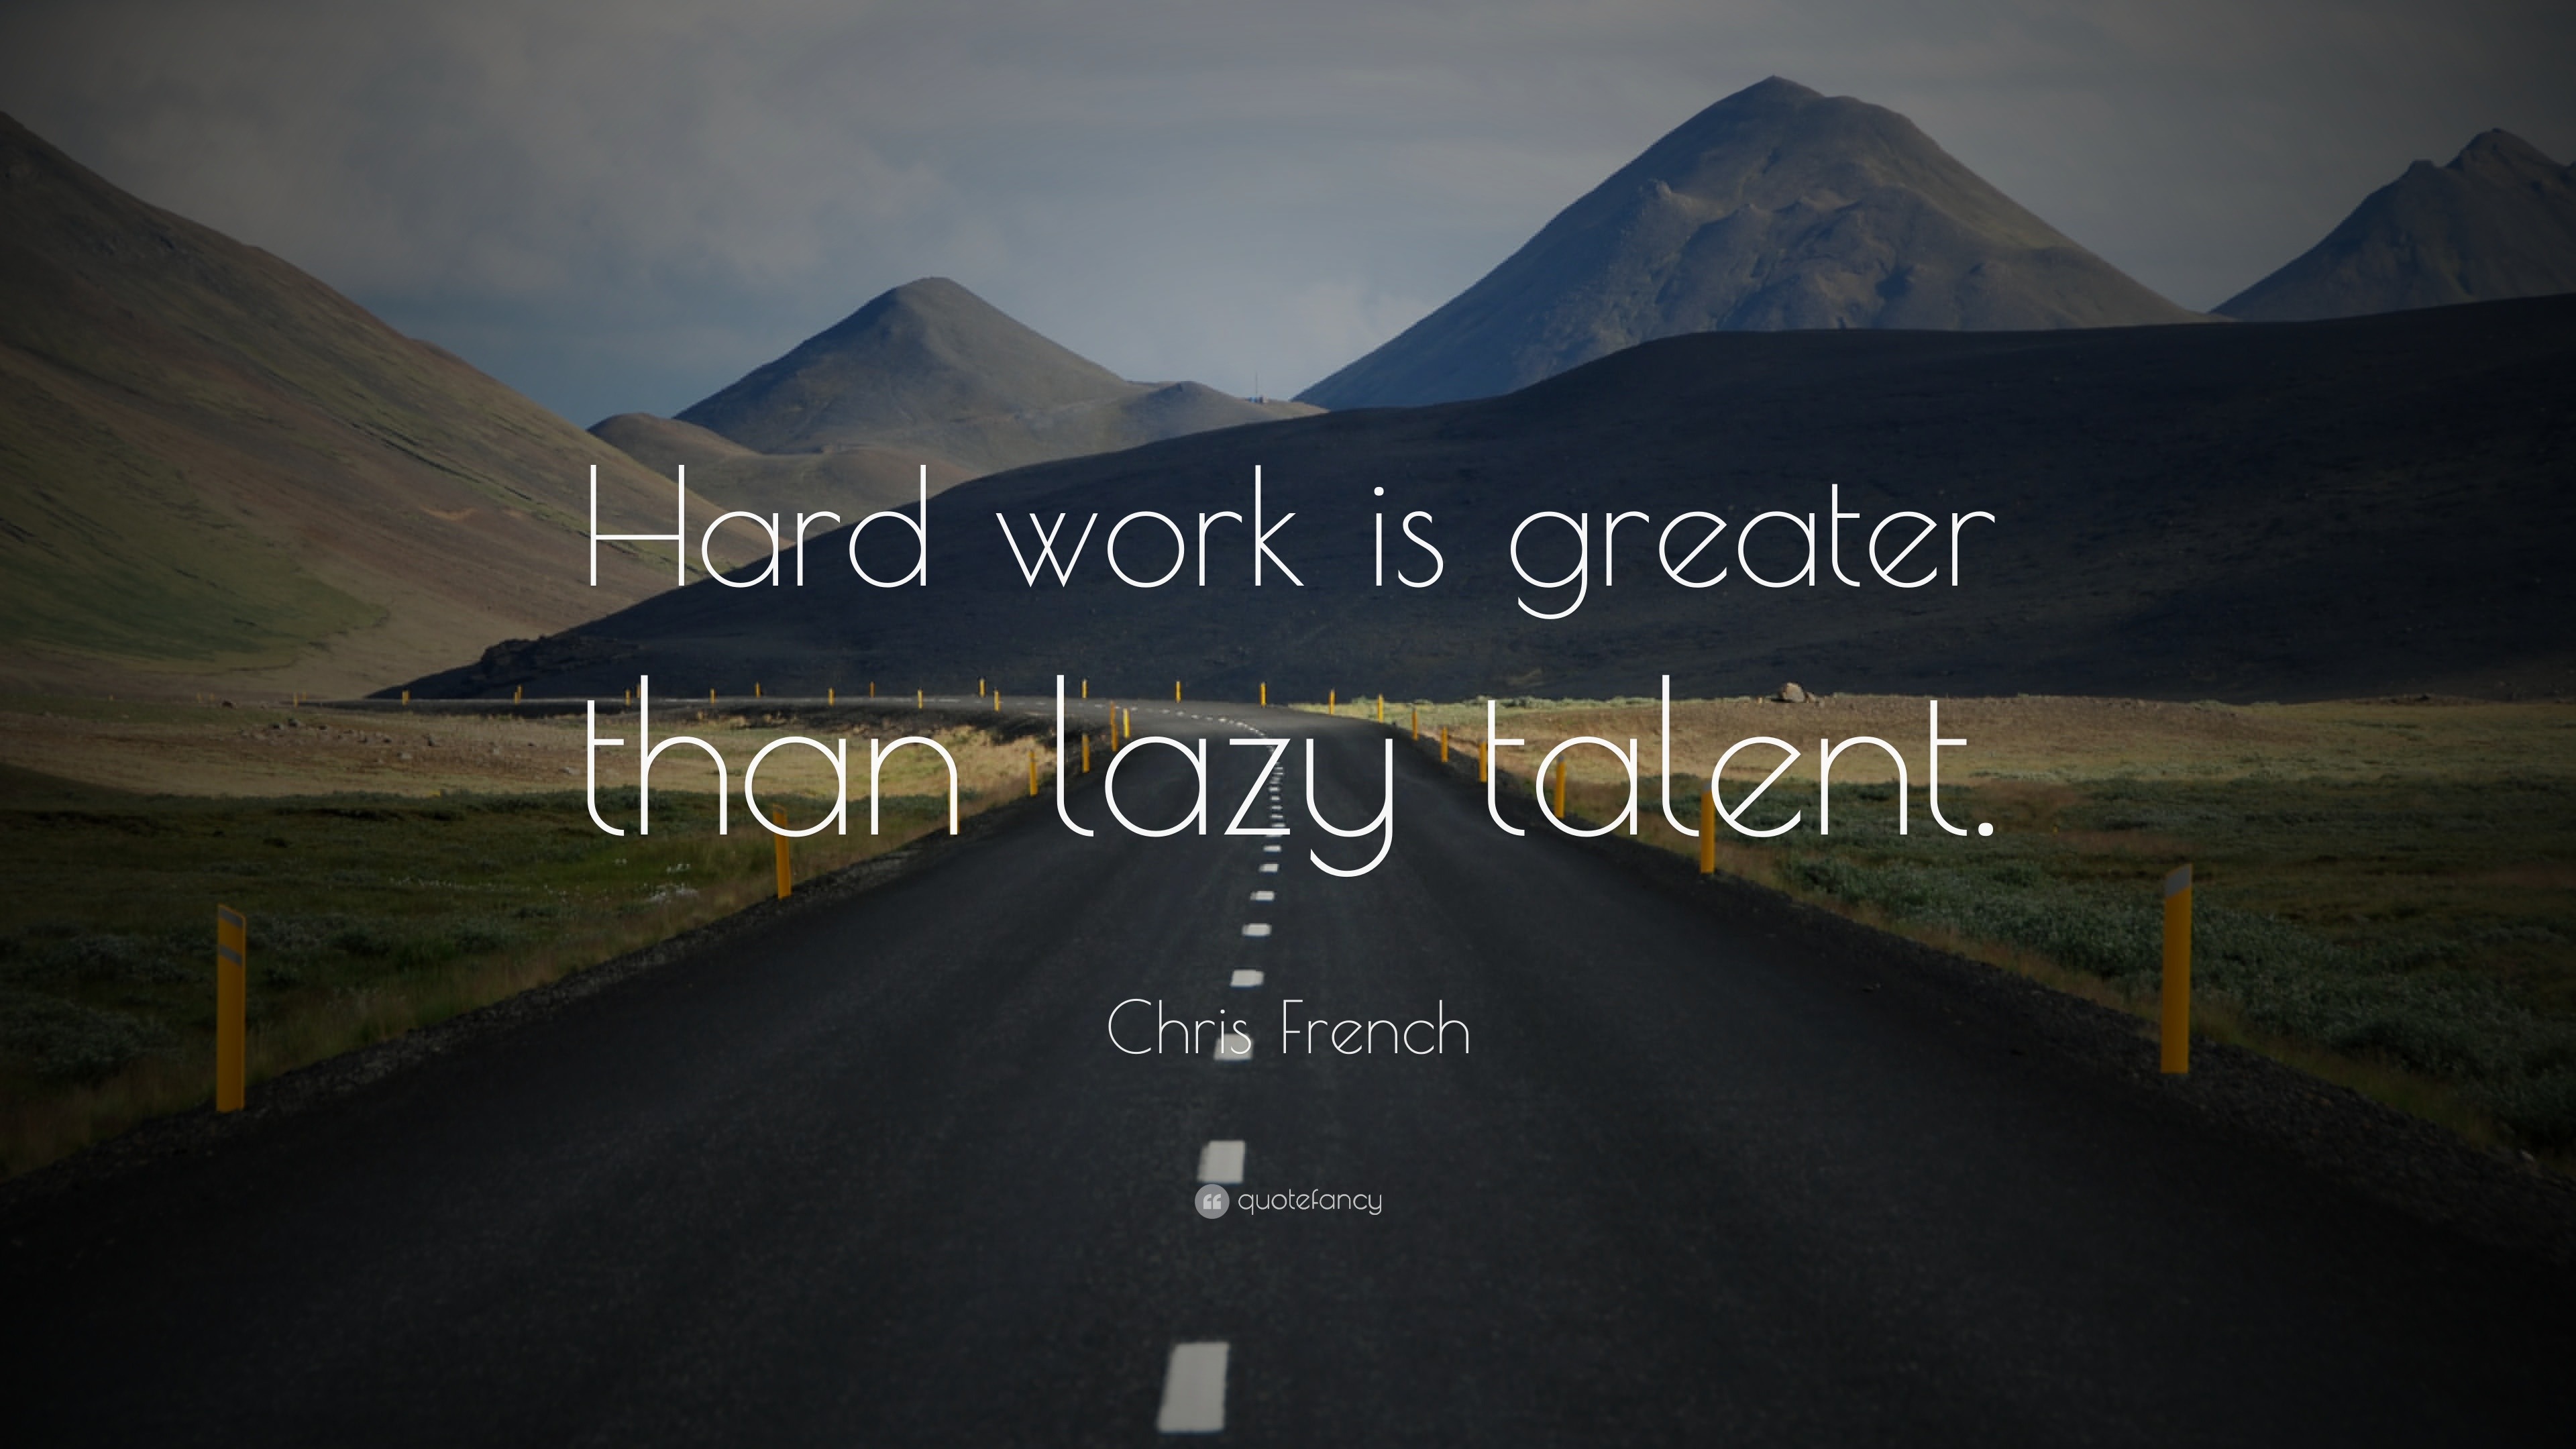 Chris French Quote: “Hard work is greater than lazy talent.”